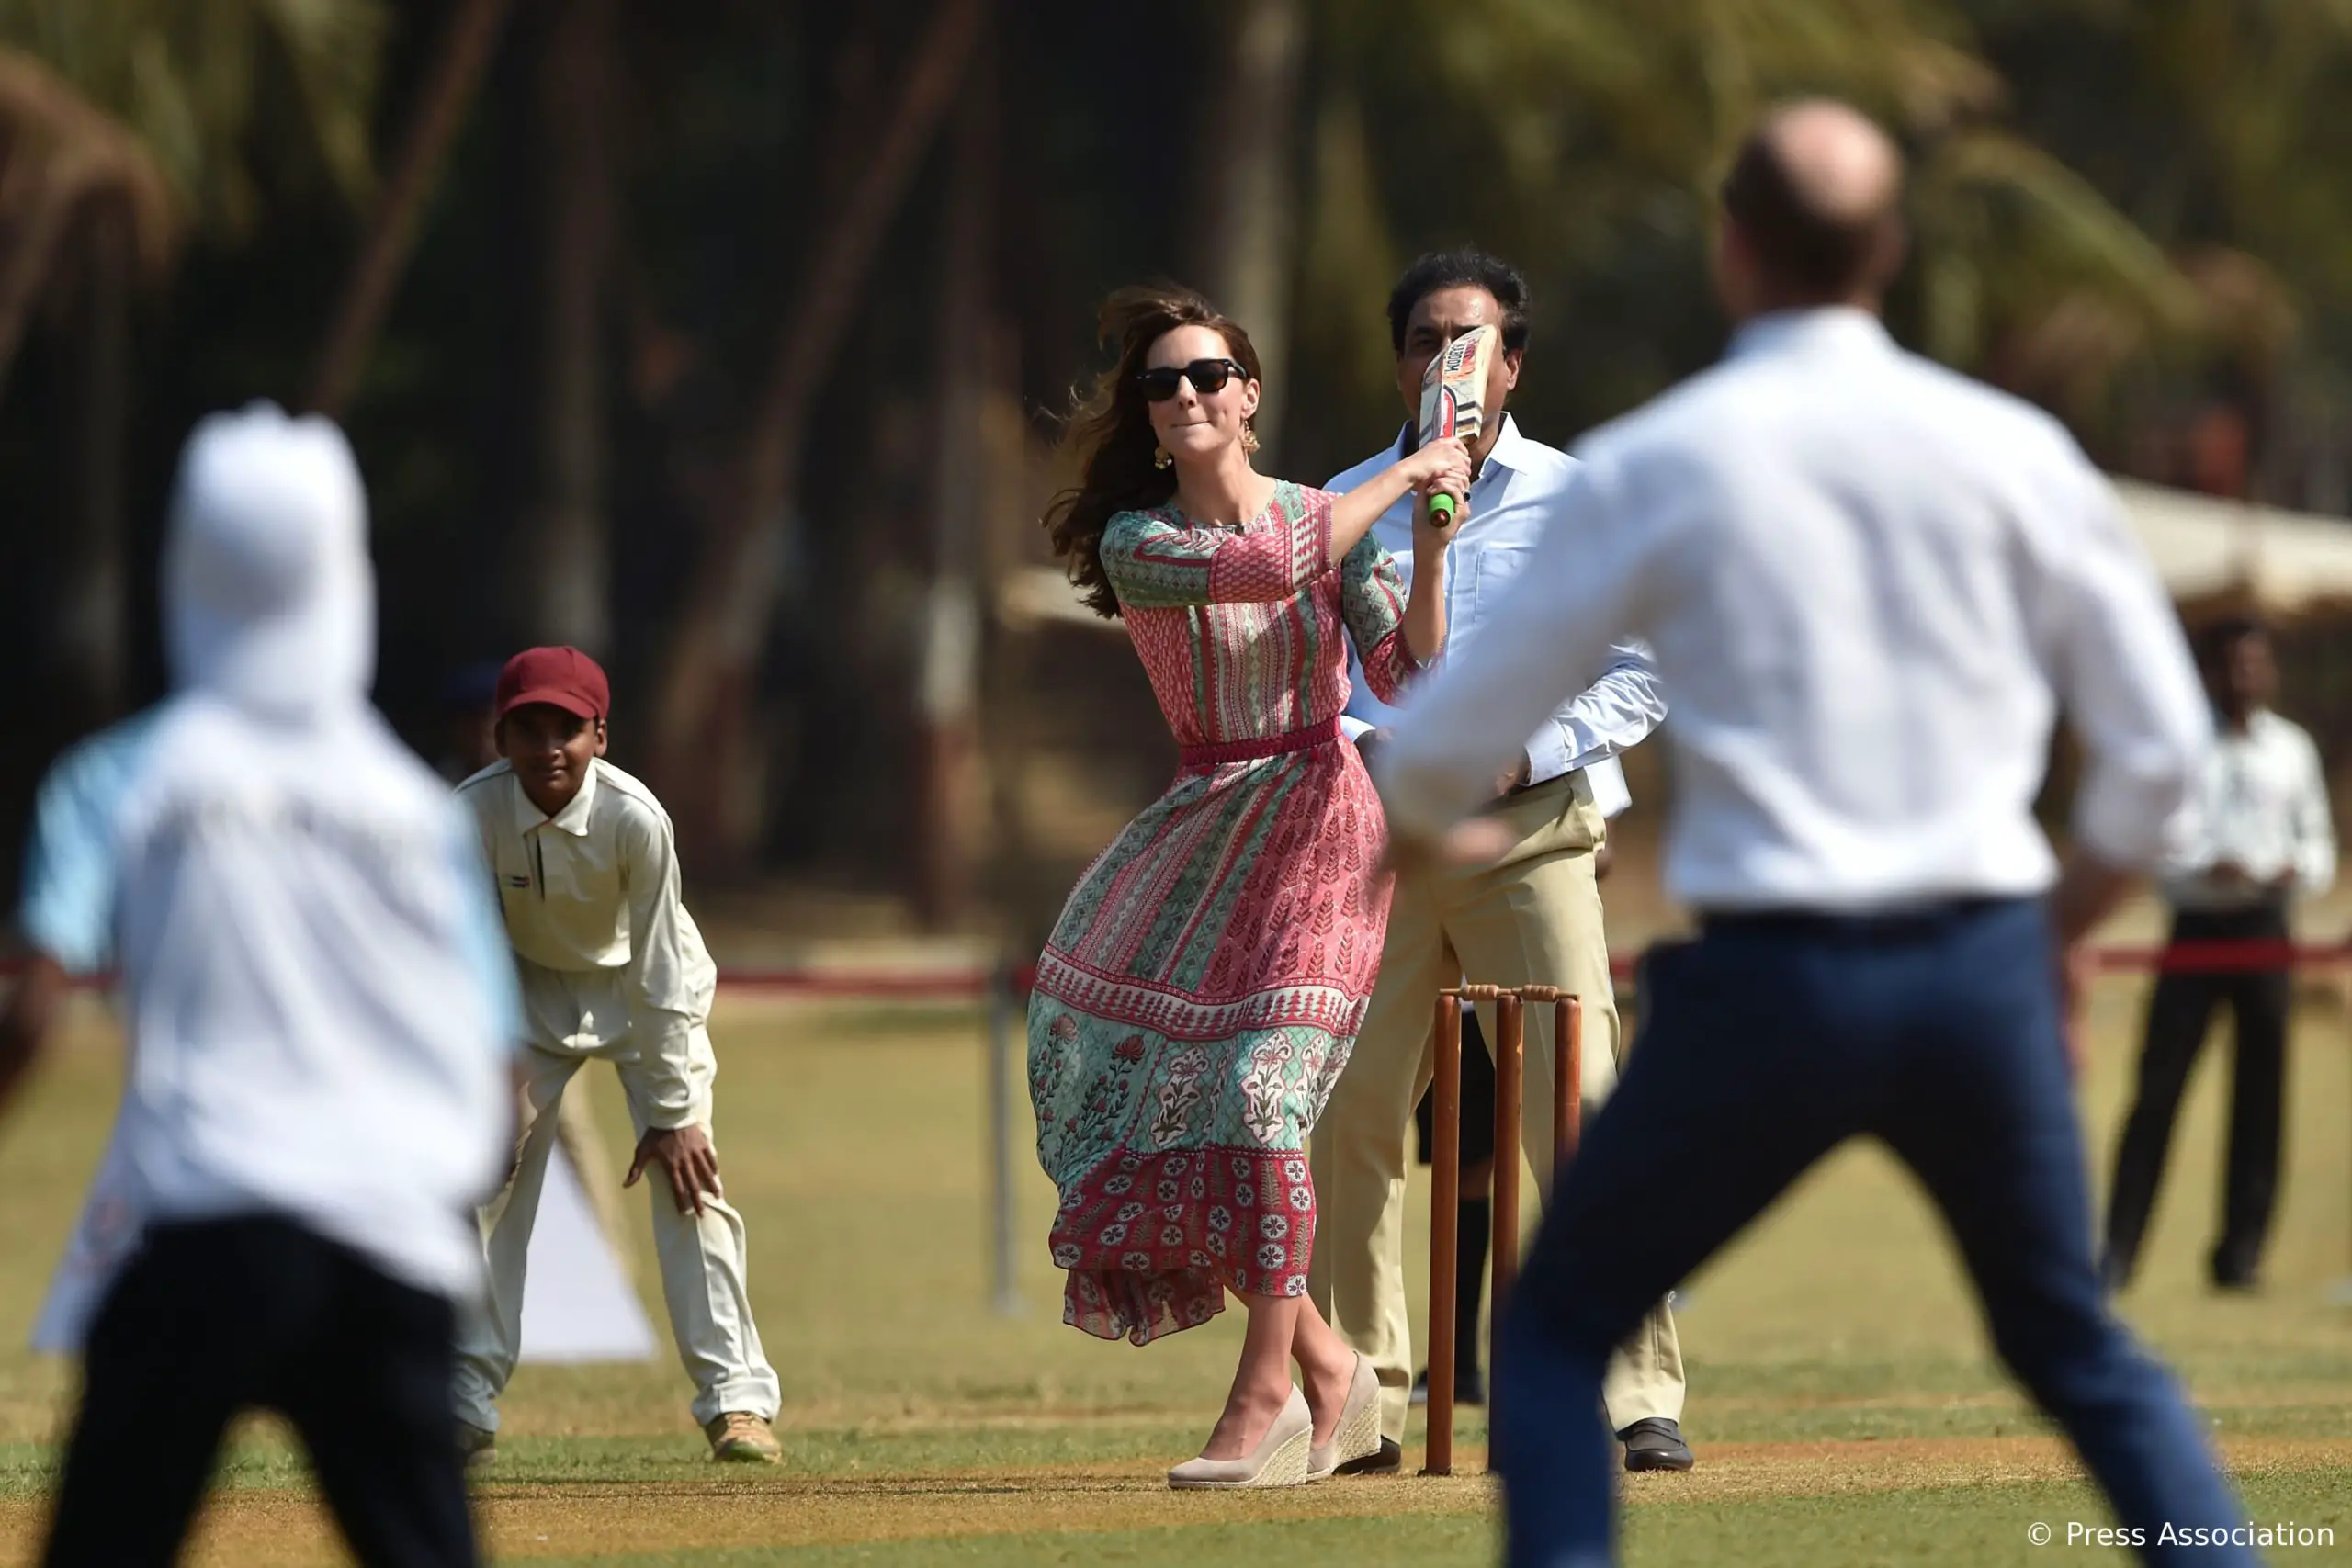 The Duchess of Cambridge playing criket in India during royal tour